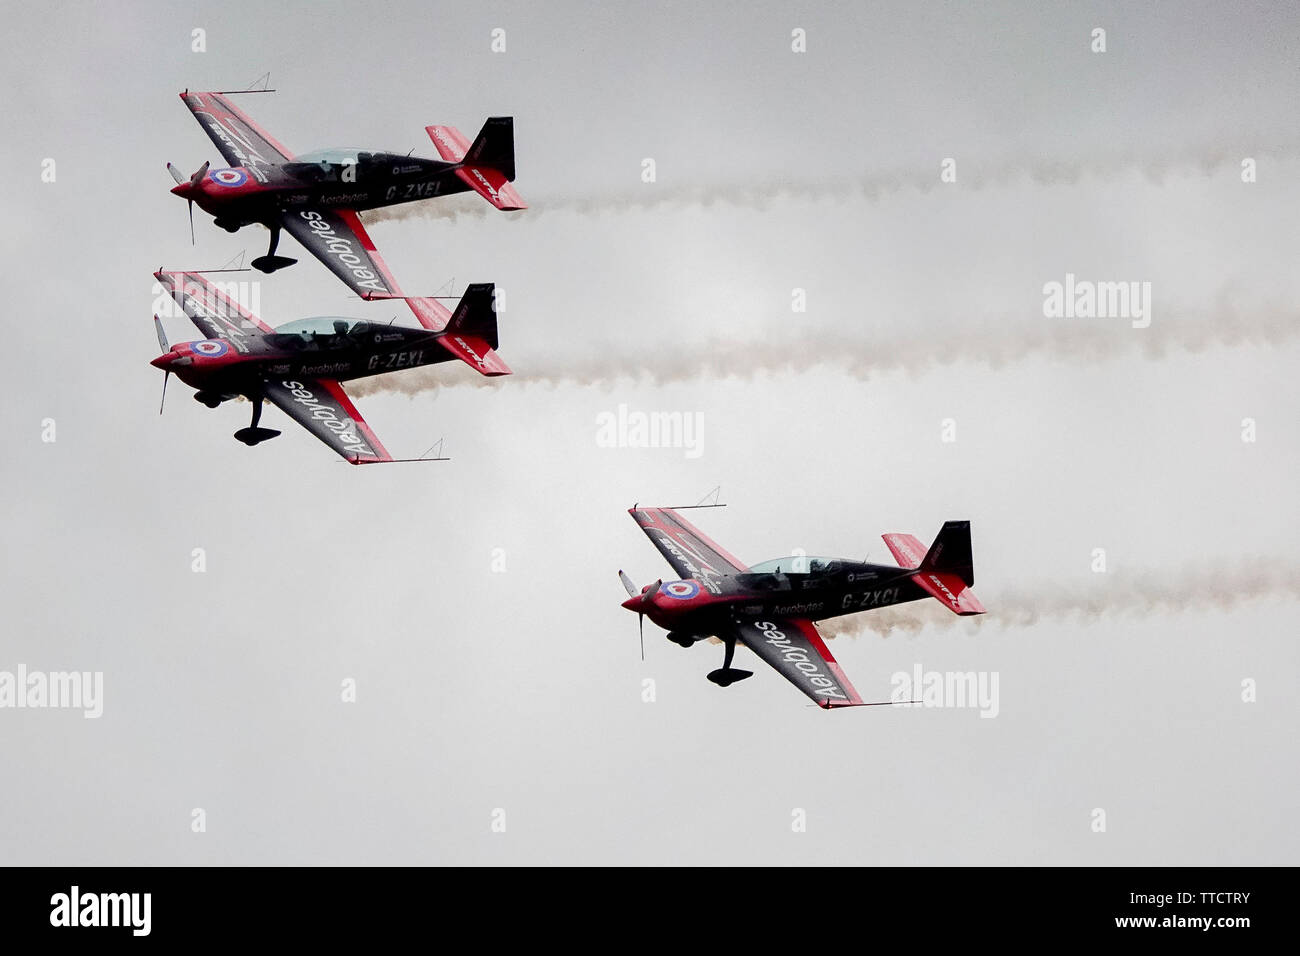 Dunsfold Common Road, Dunsfold. 16th June 2018. The final air show took place at Dunsfold Aerodrome today. Aircraft seen from Dunsfold village as they took part in the aerobatics display. Credit: james jagger/Alamy Live News Stock Photo